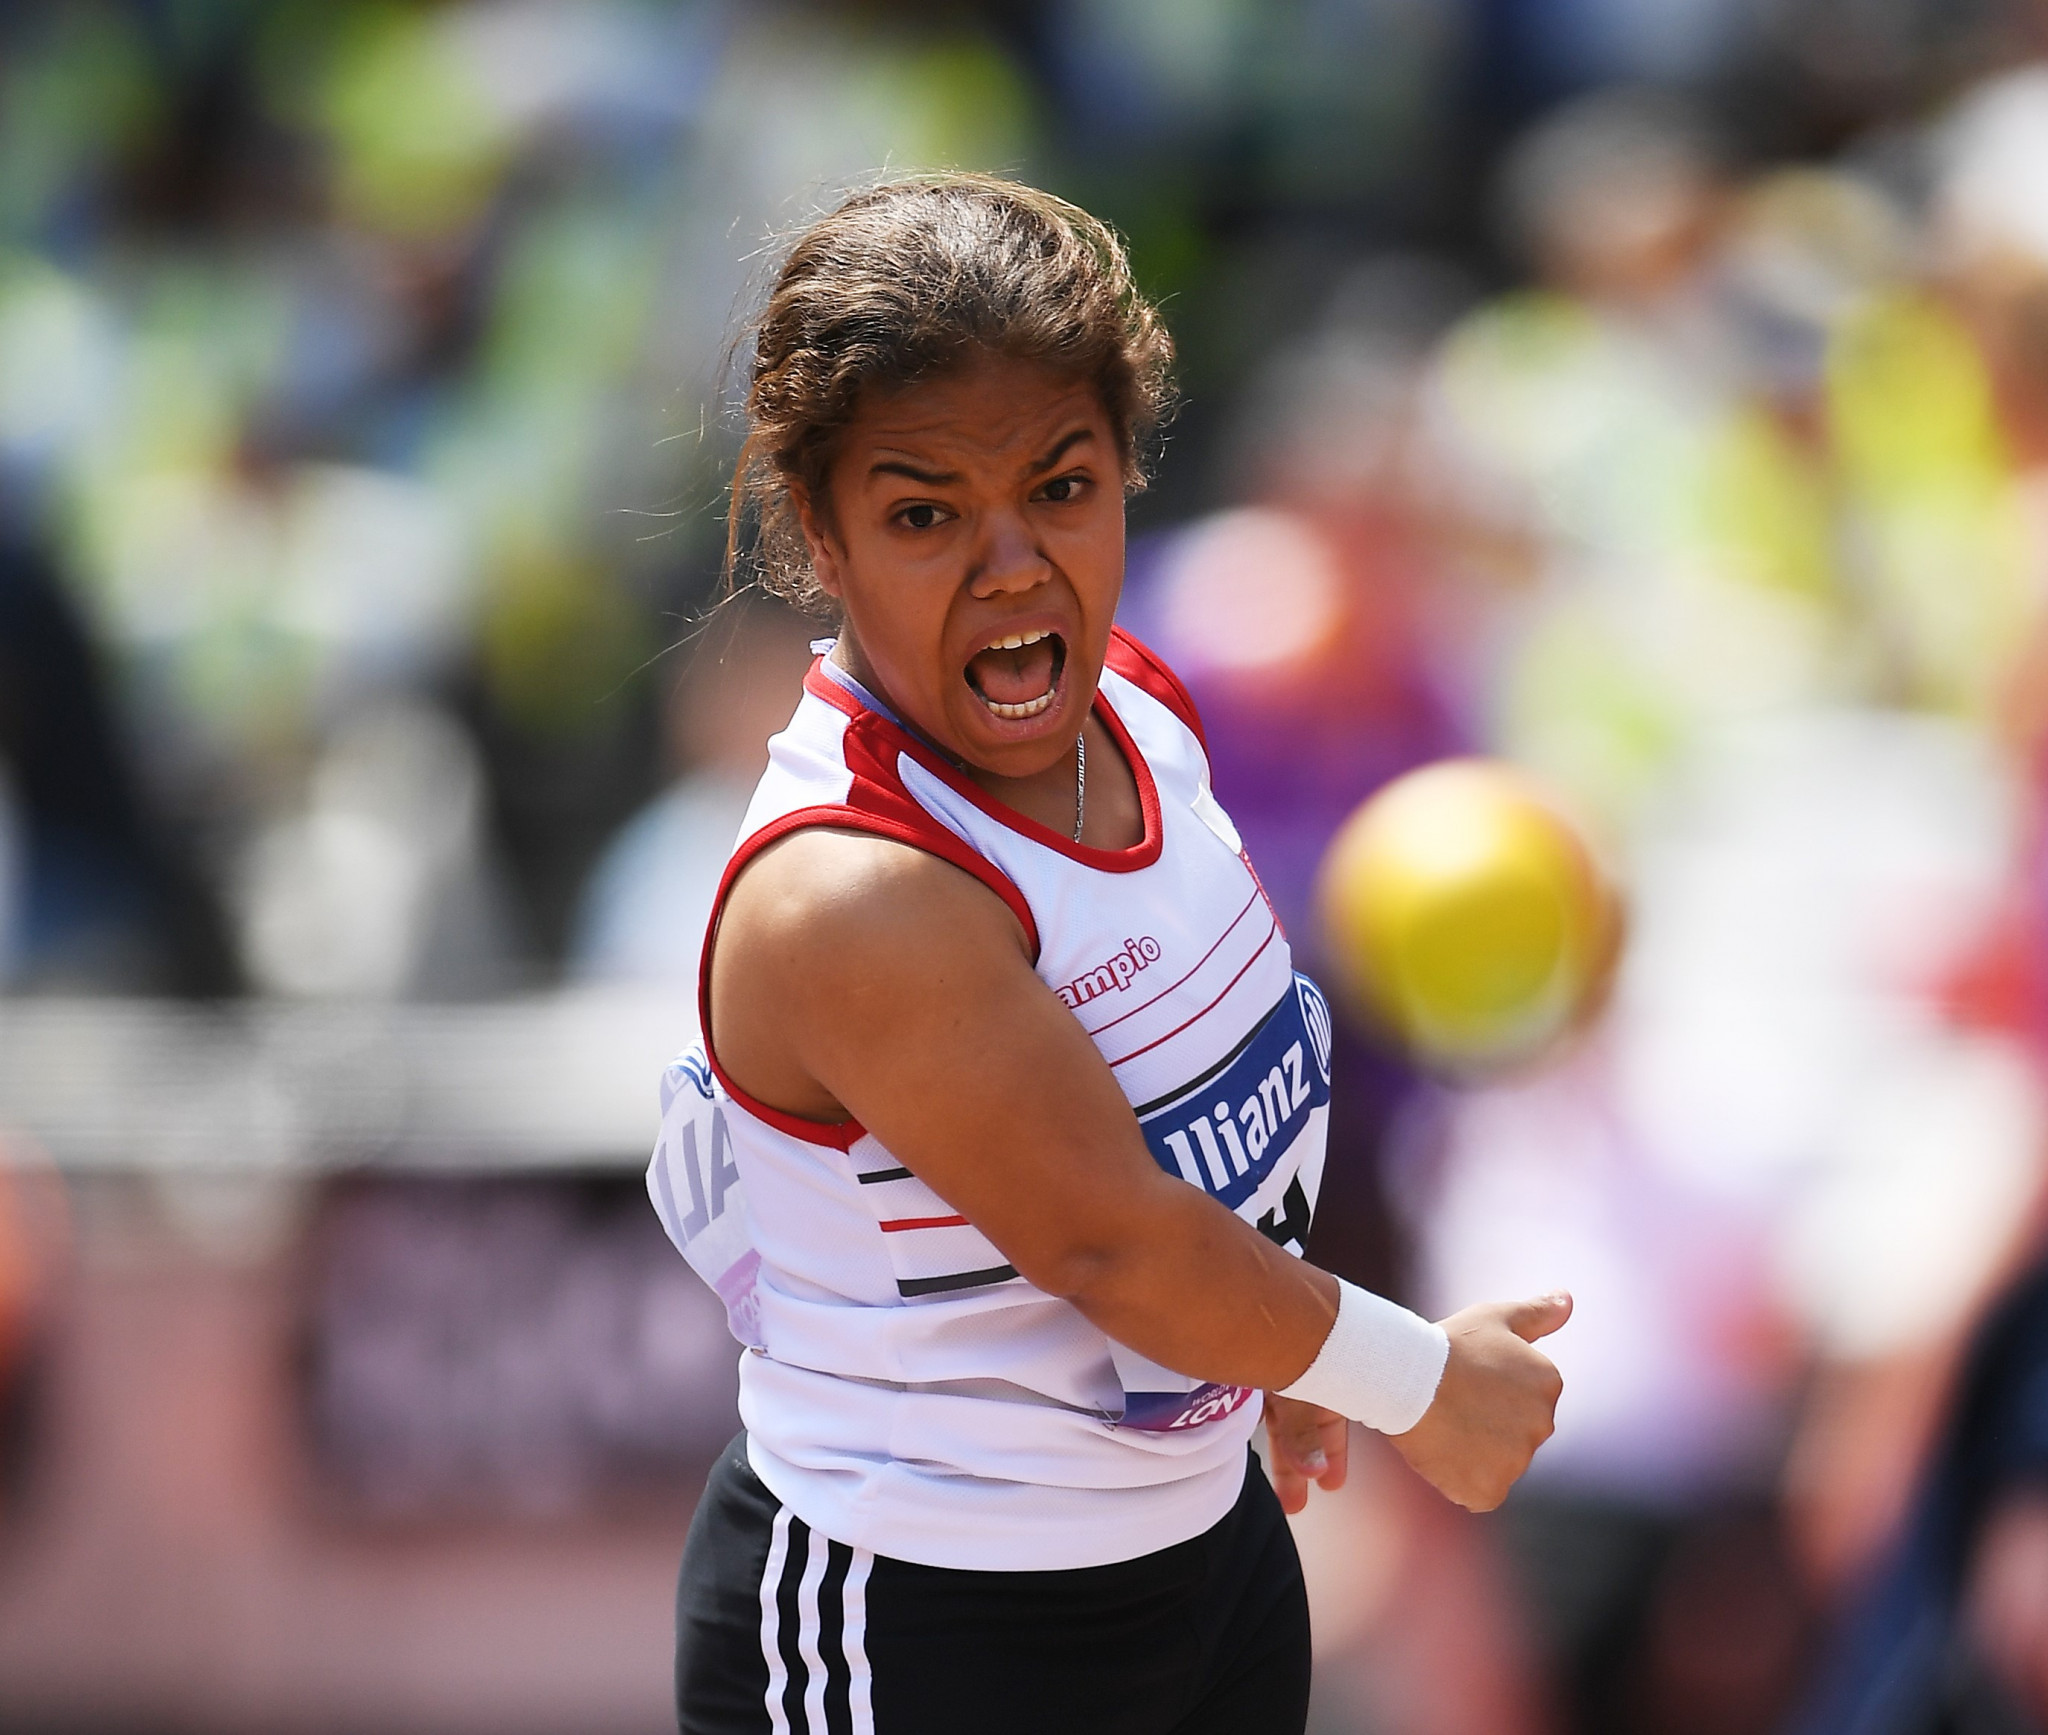 Rodriguez wins long jump on second day of World Para Athletics Grand Prix in Tunis